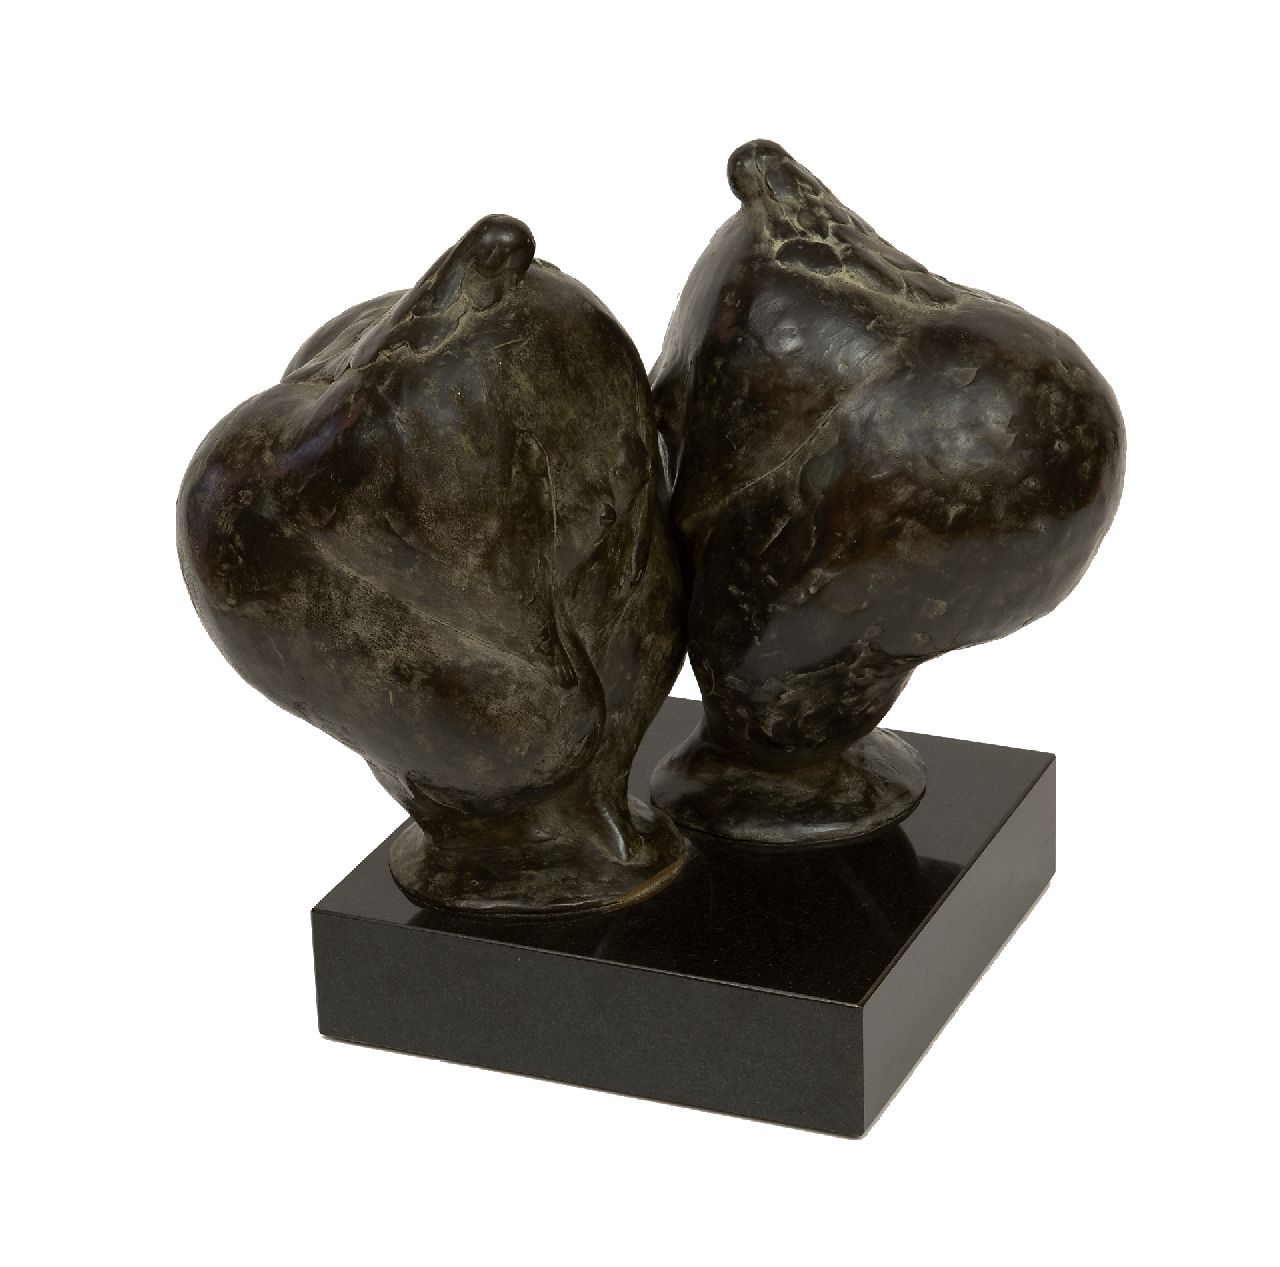 Hemert E. van | Evert van Hemert | Sculptures and objects offered for sale | Small Talk, patinated bronze 24.0 x 34.0 cm, signed with monogram on the bronze base and executed in 2016